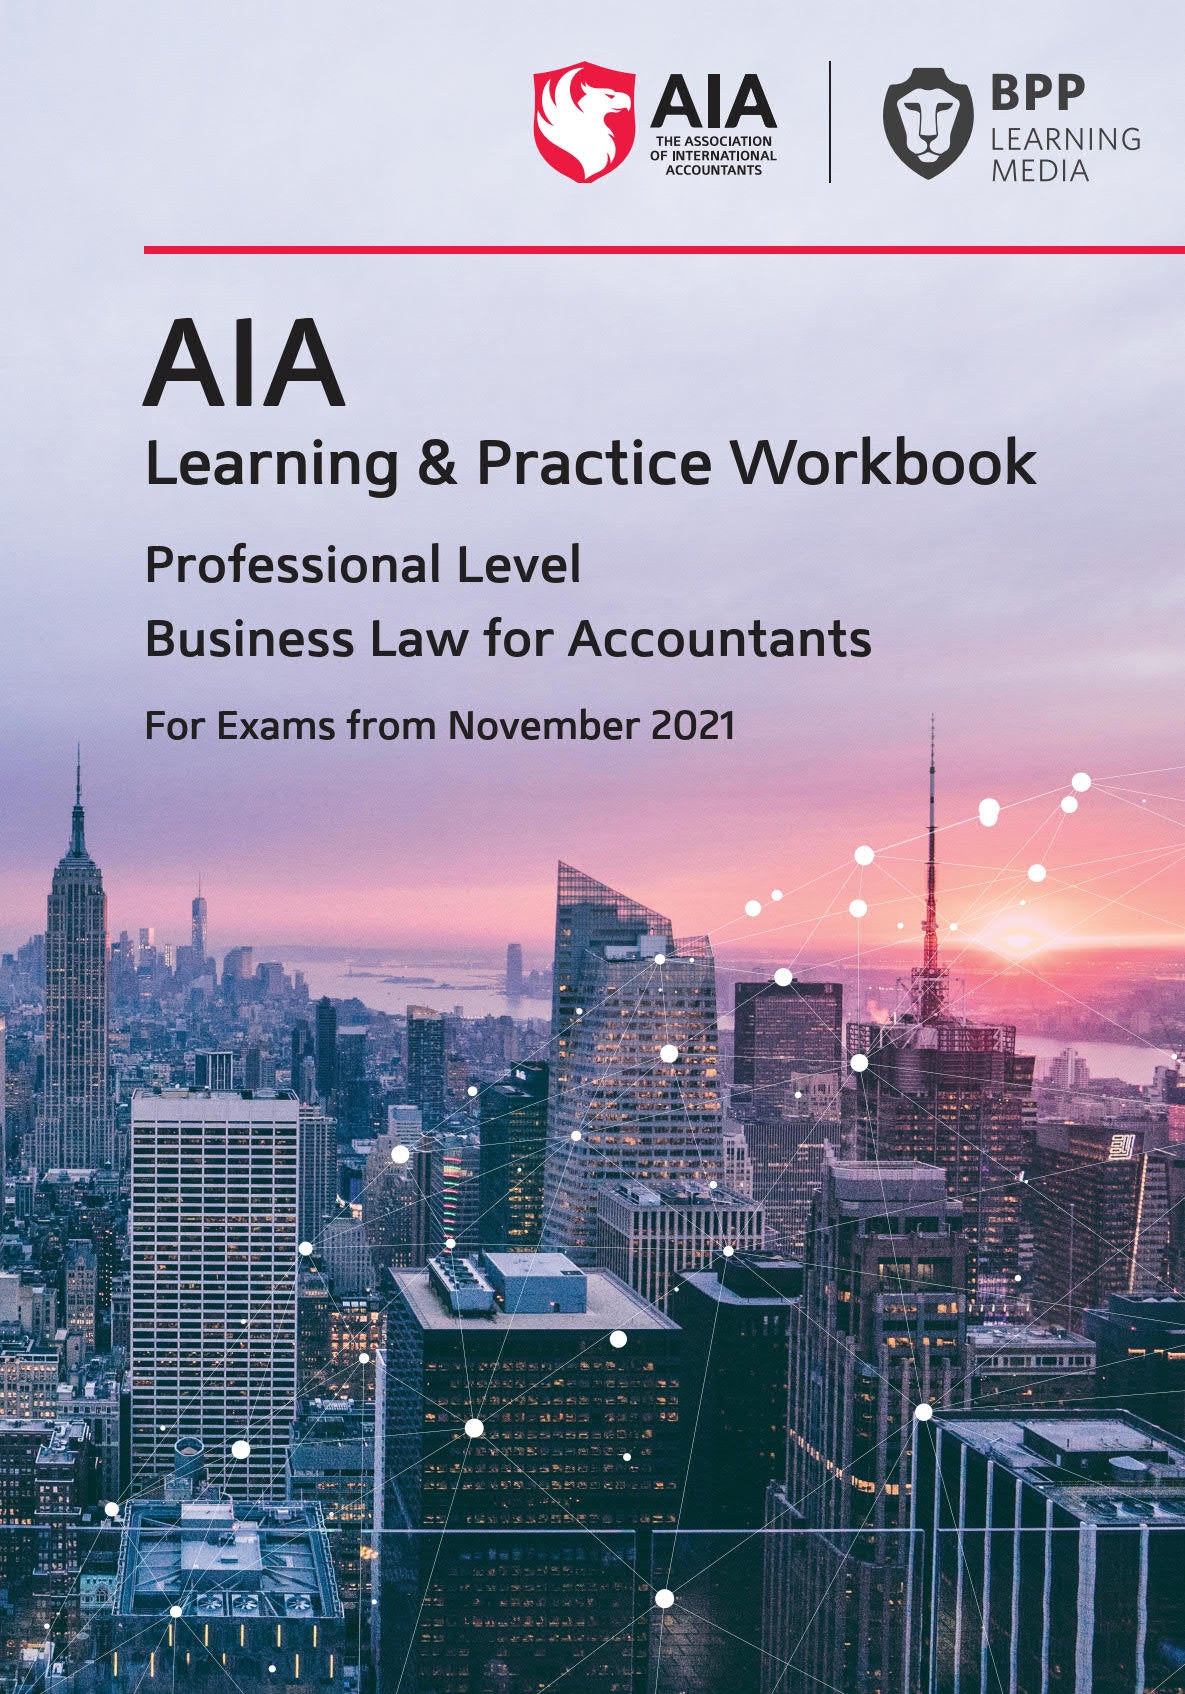 Business Law for Accountants